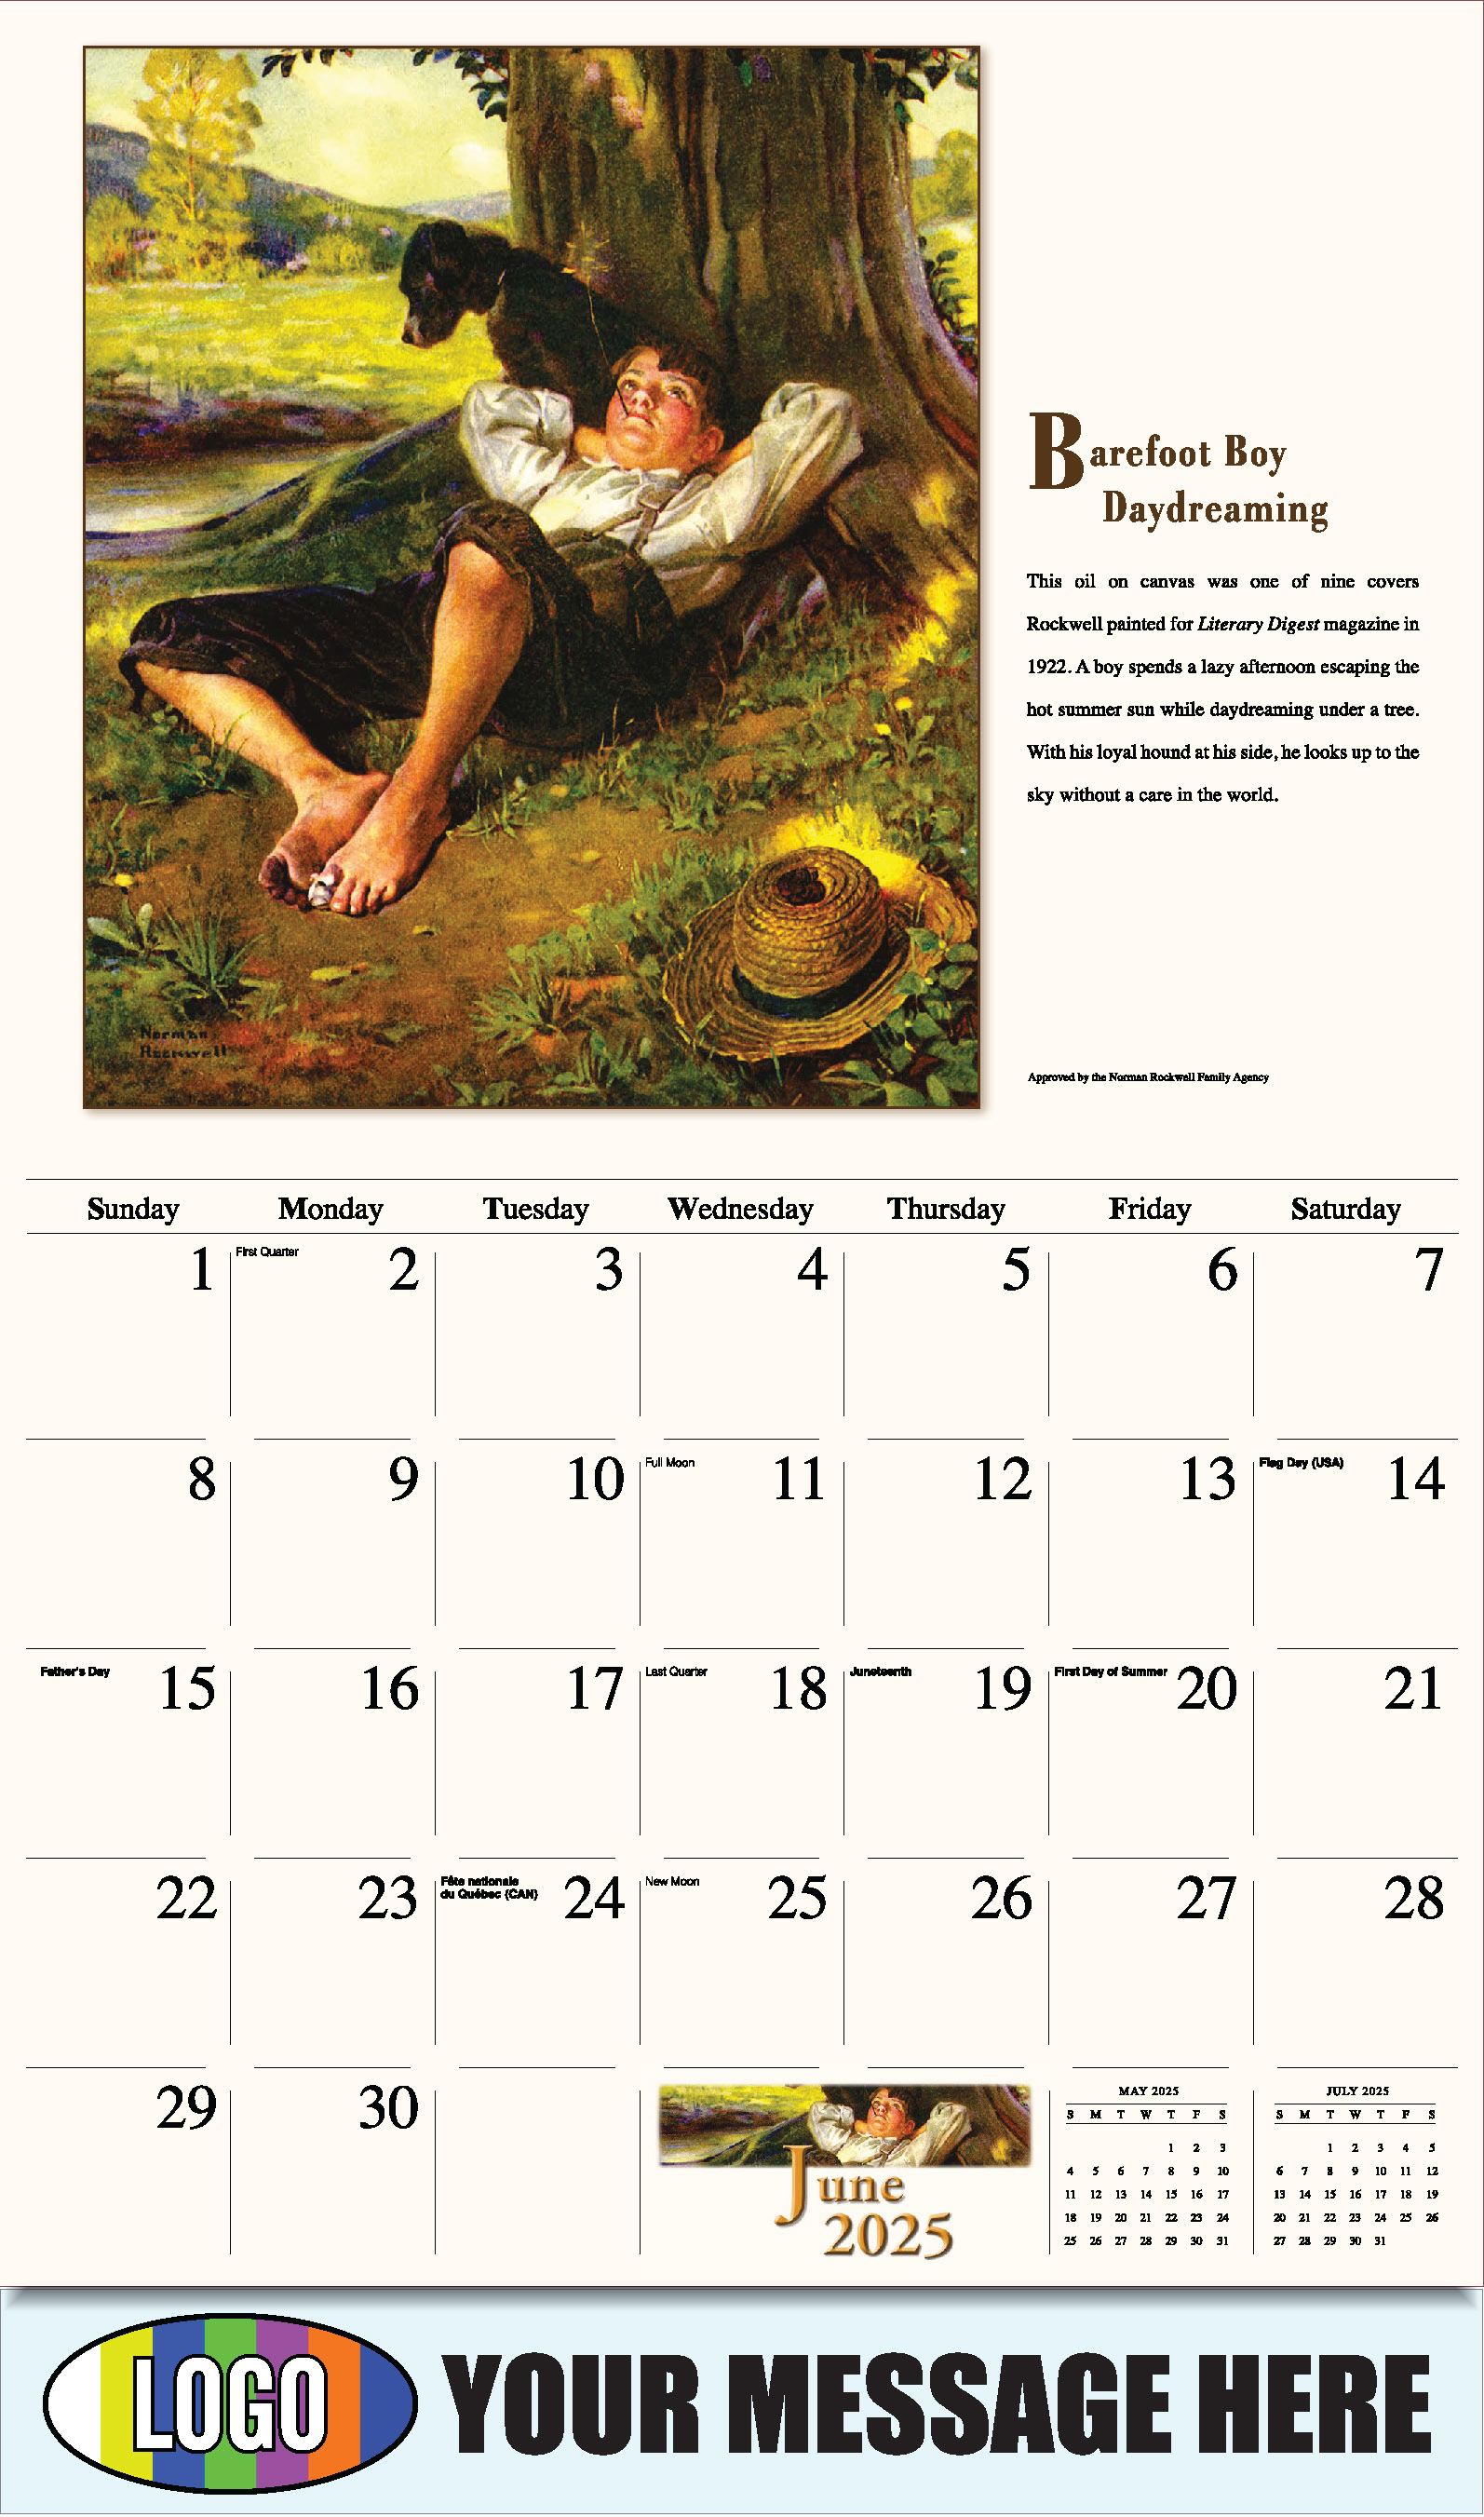 Memorable Images by Norman Rockwell 2025 Business Promotional Wall Calendar - June